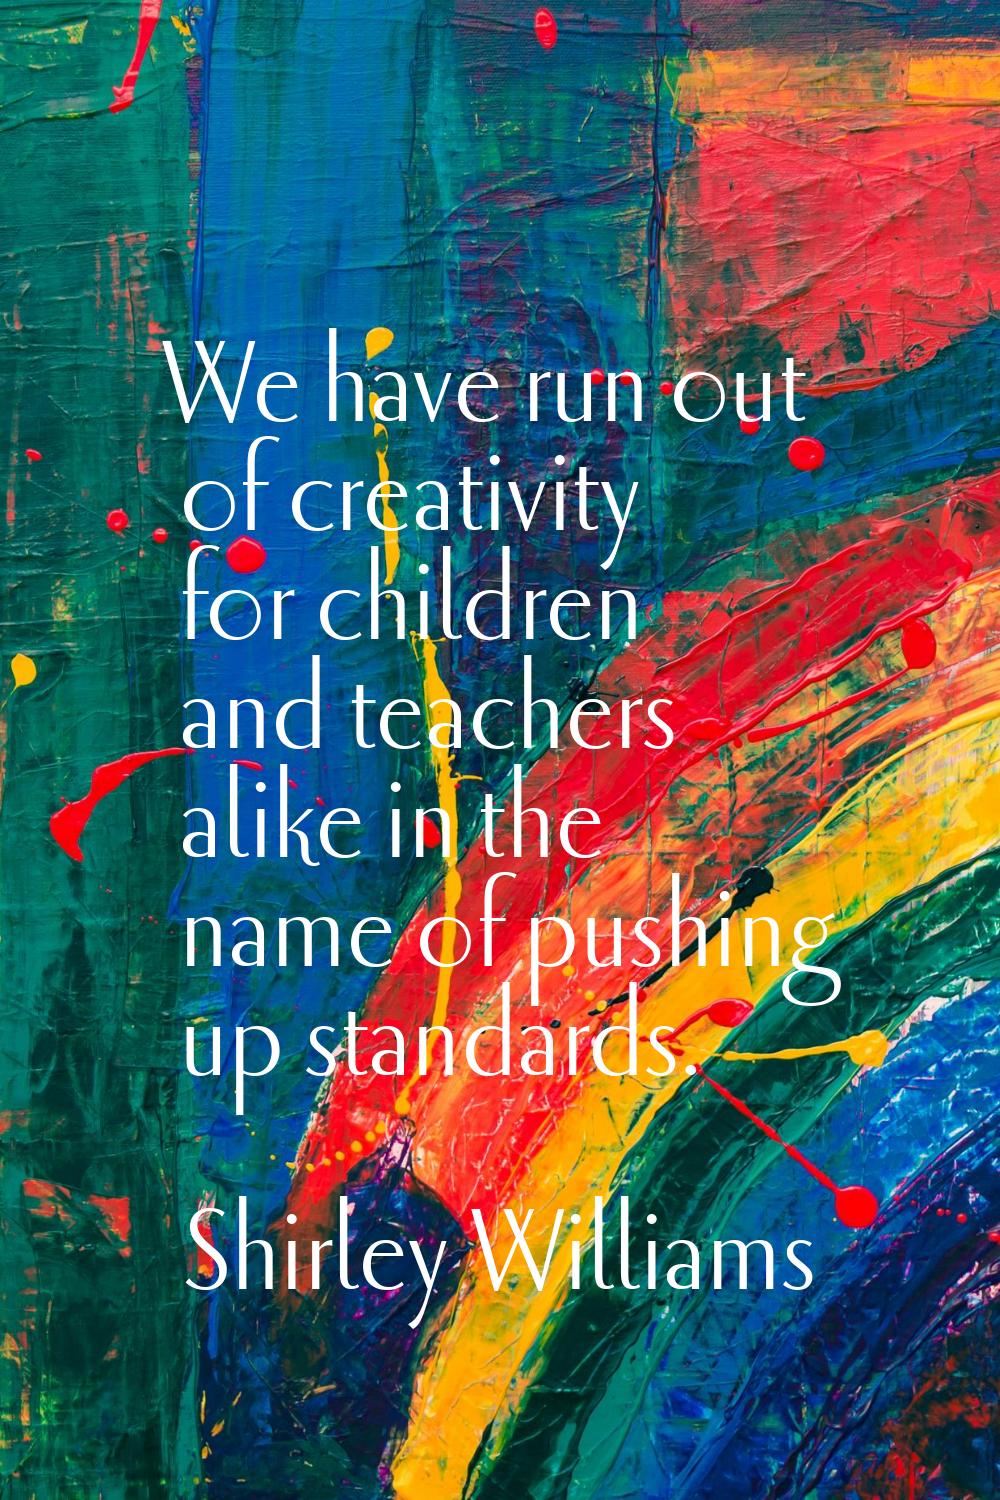 We have run out of creativity for children and teachers alike in the name of pushing up standards.